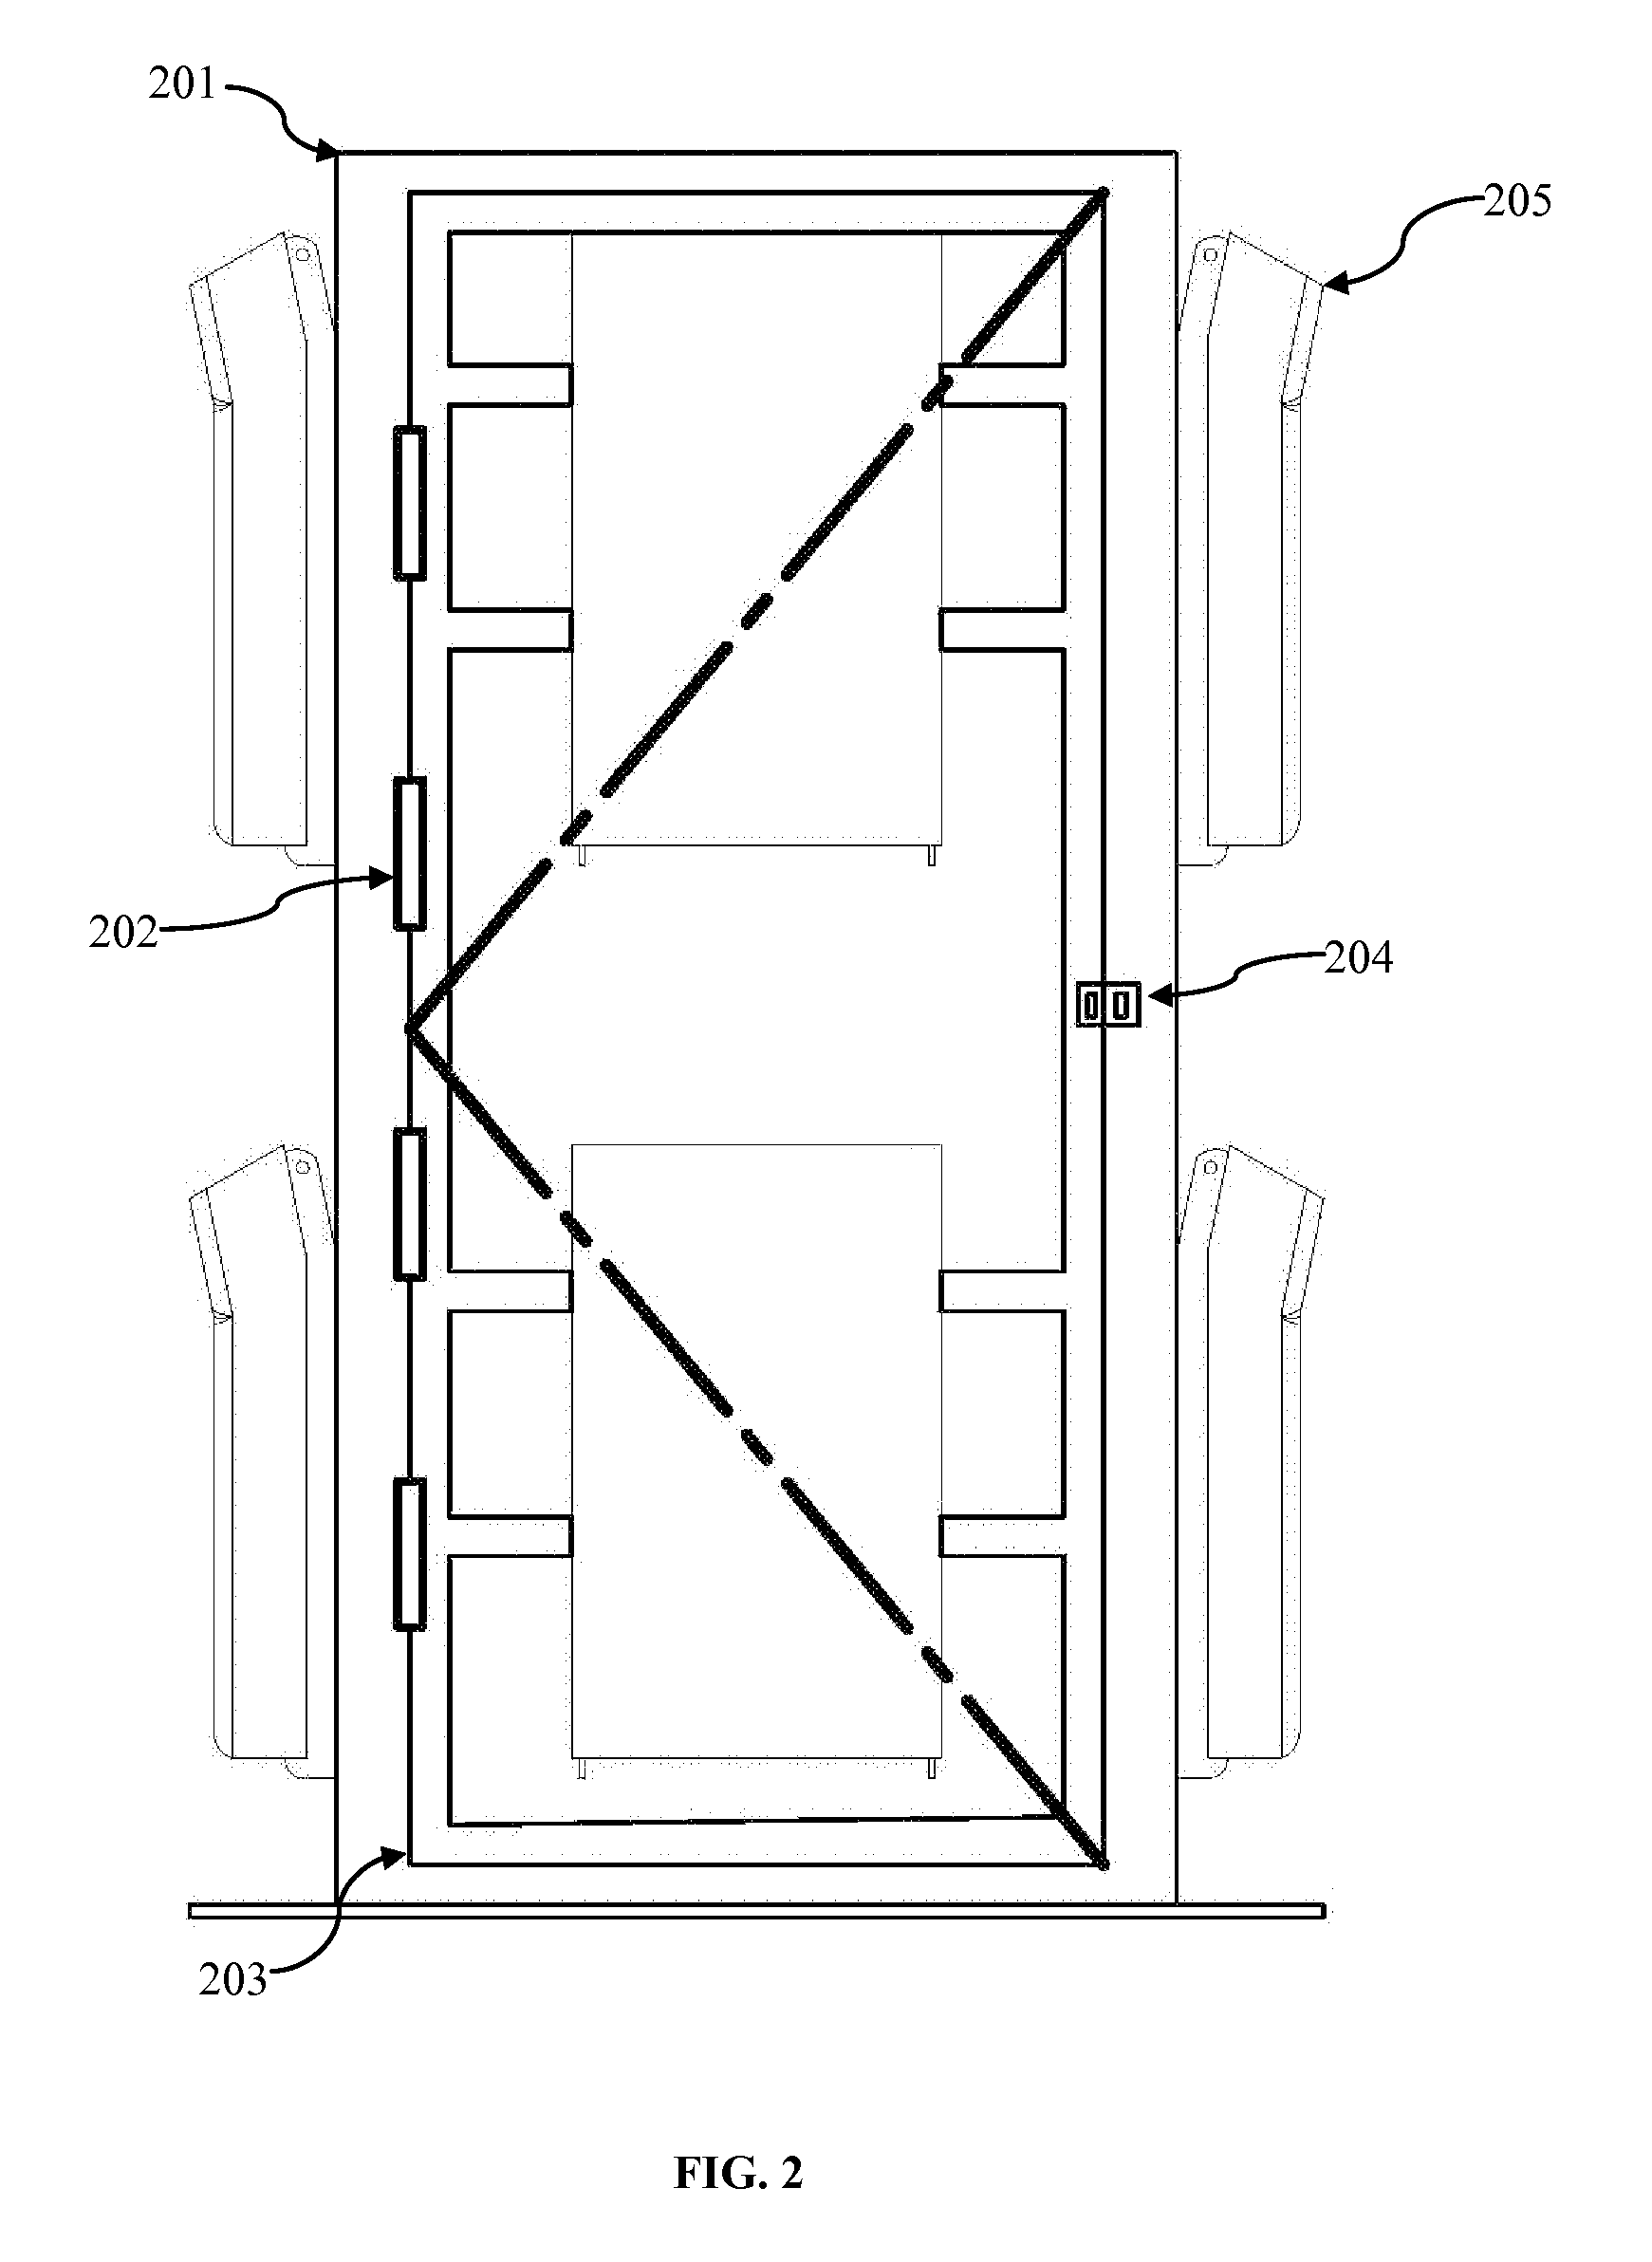 Adaptable Telecommunications Equipment Mounting Frame